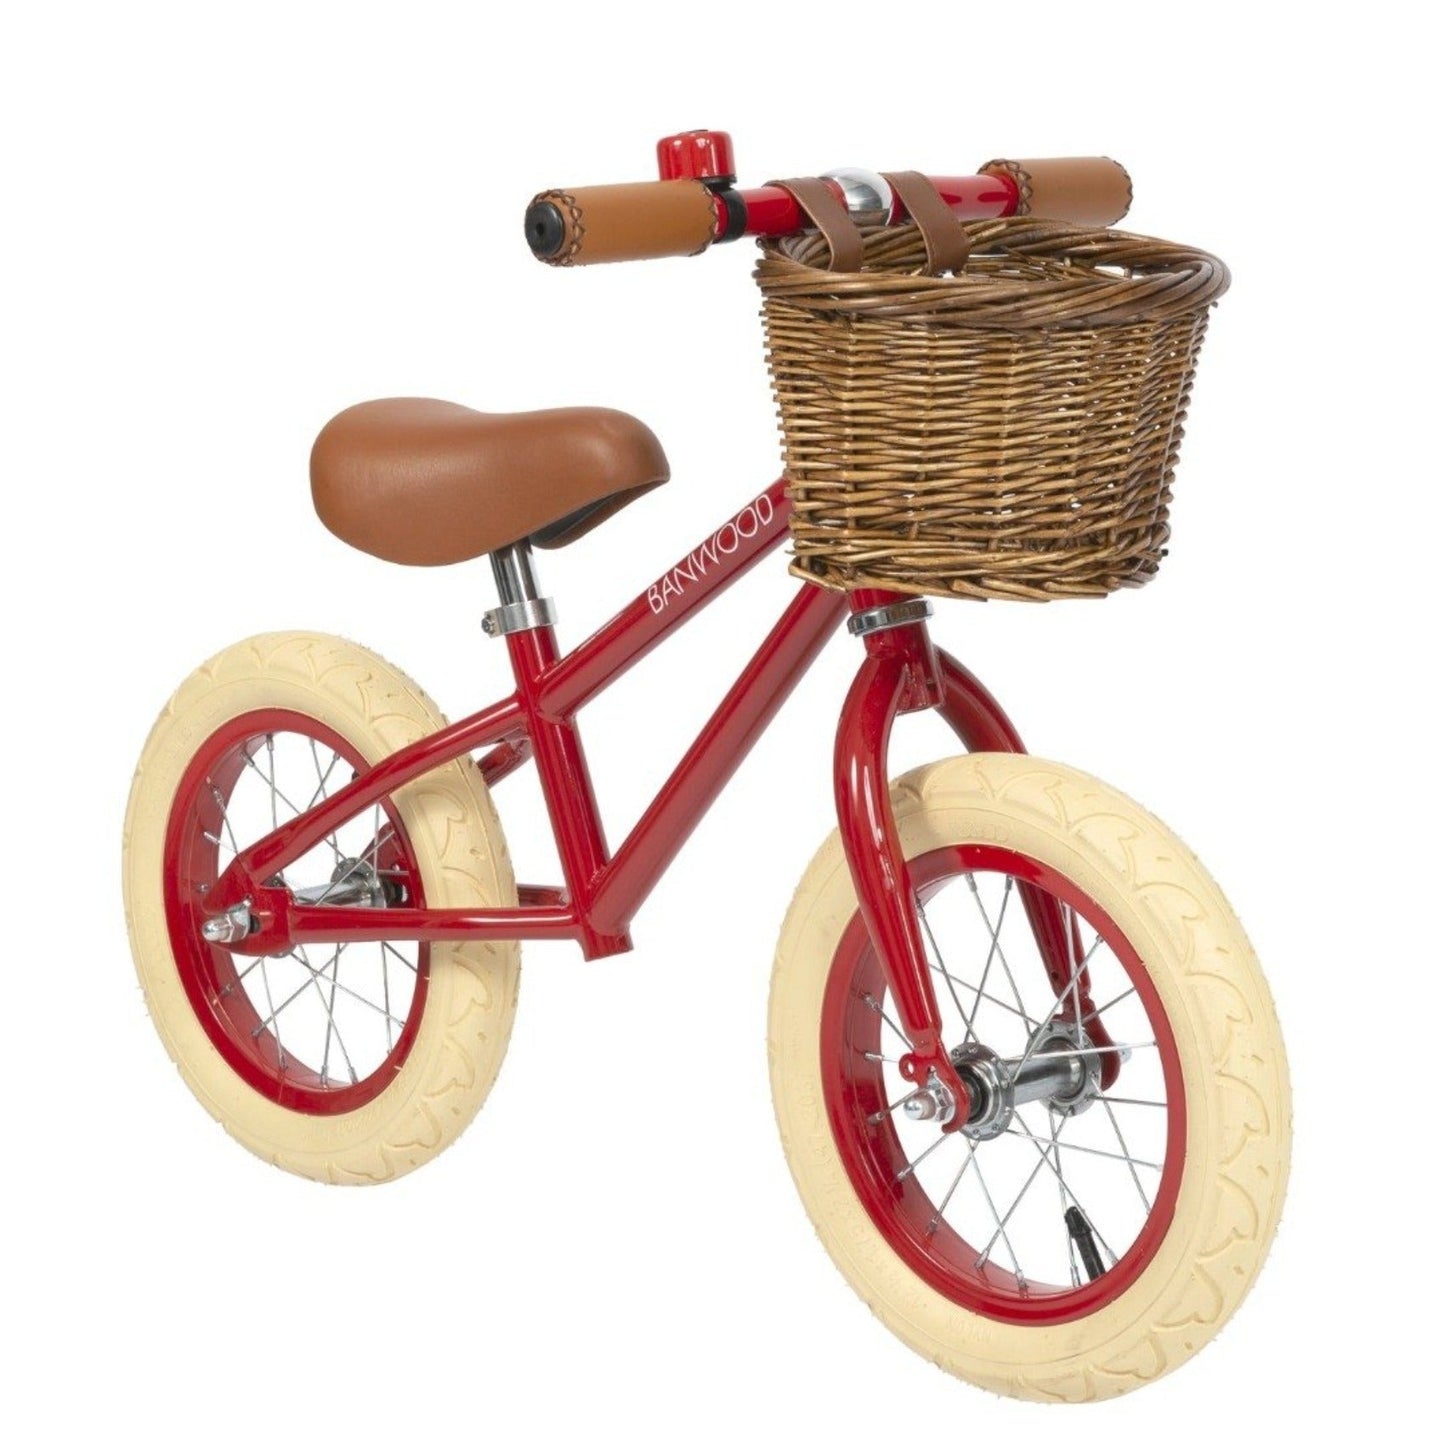 Balance Bike First Go! Red Bicycle Nofred 